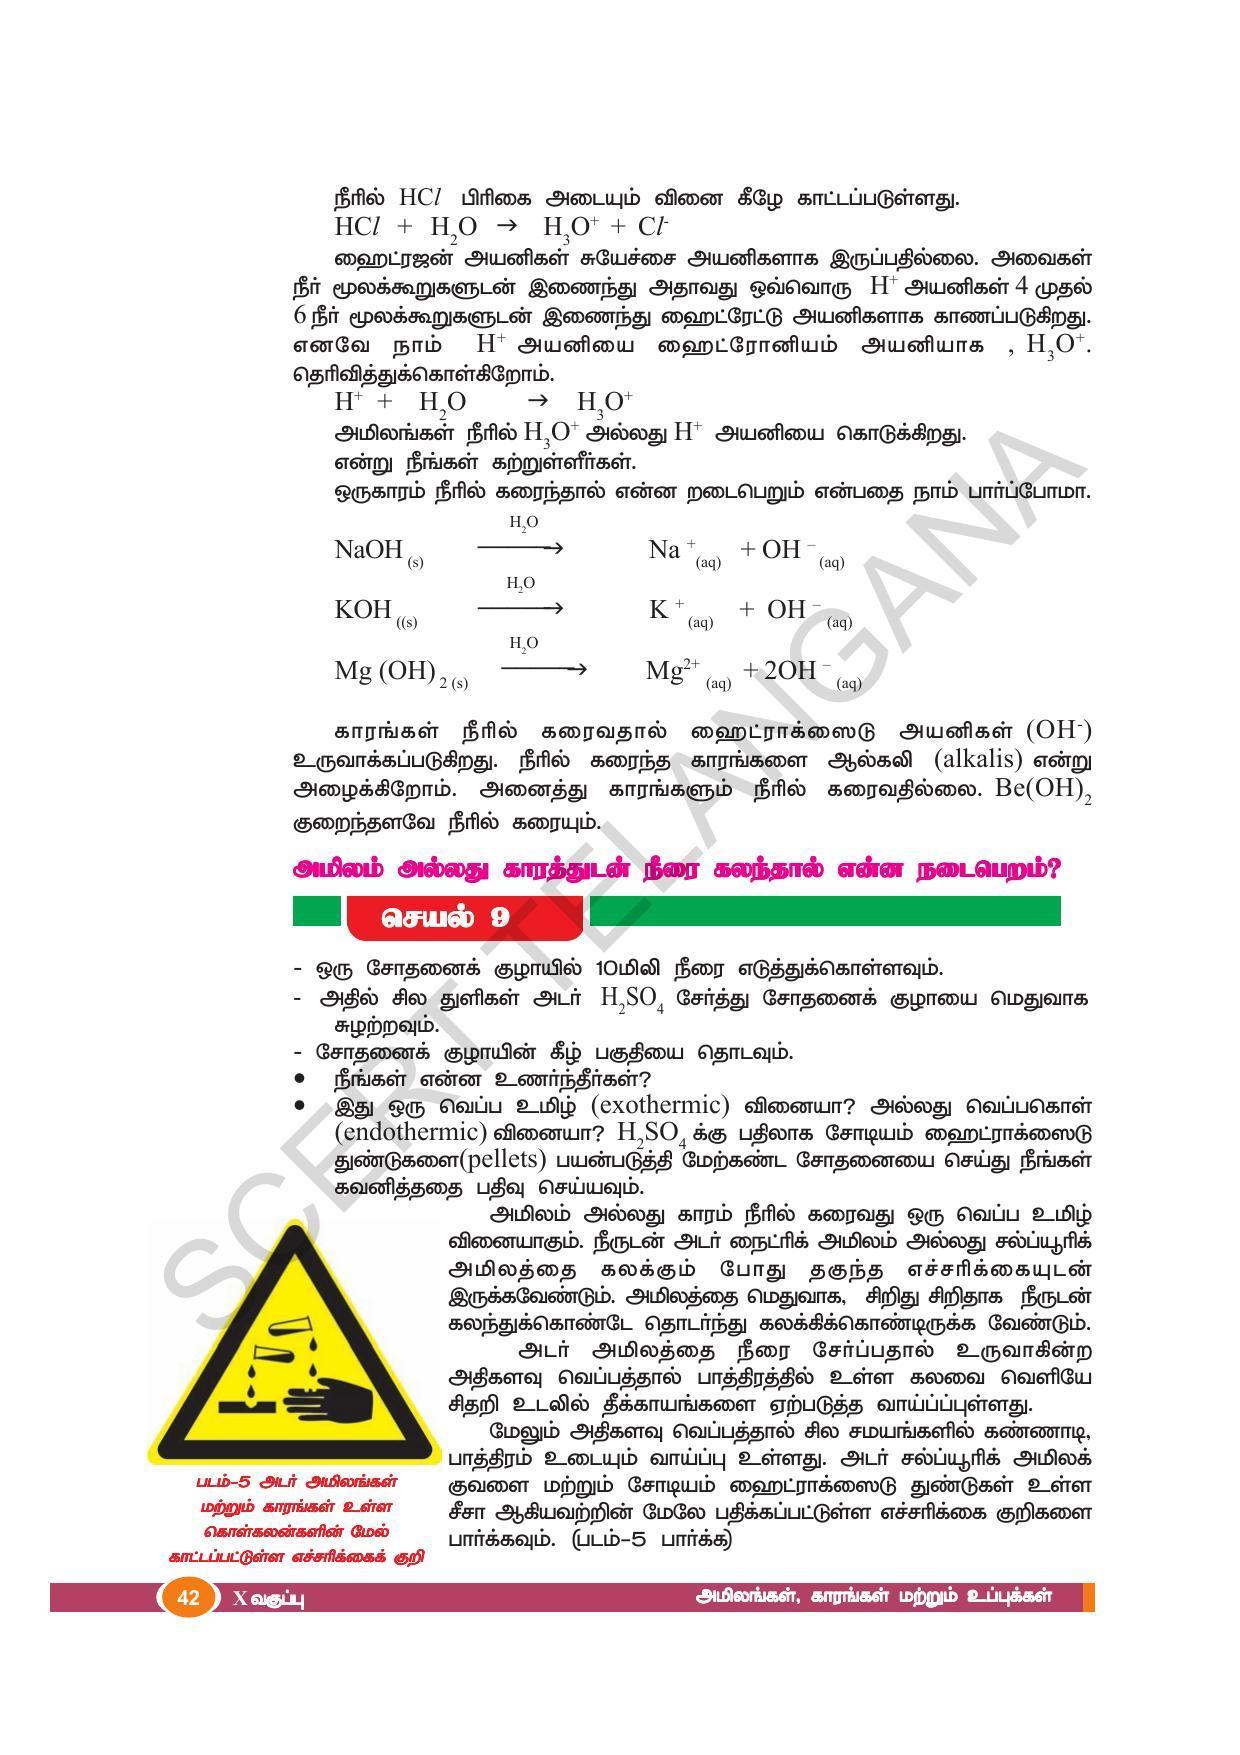 TS SCERT Class 10 Physical Science(Tamil Medium) Text Book - Page 54